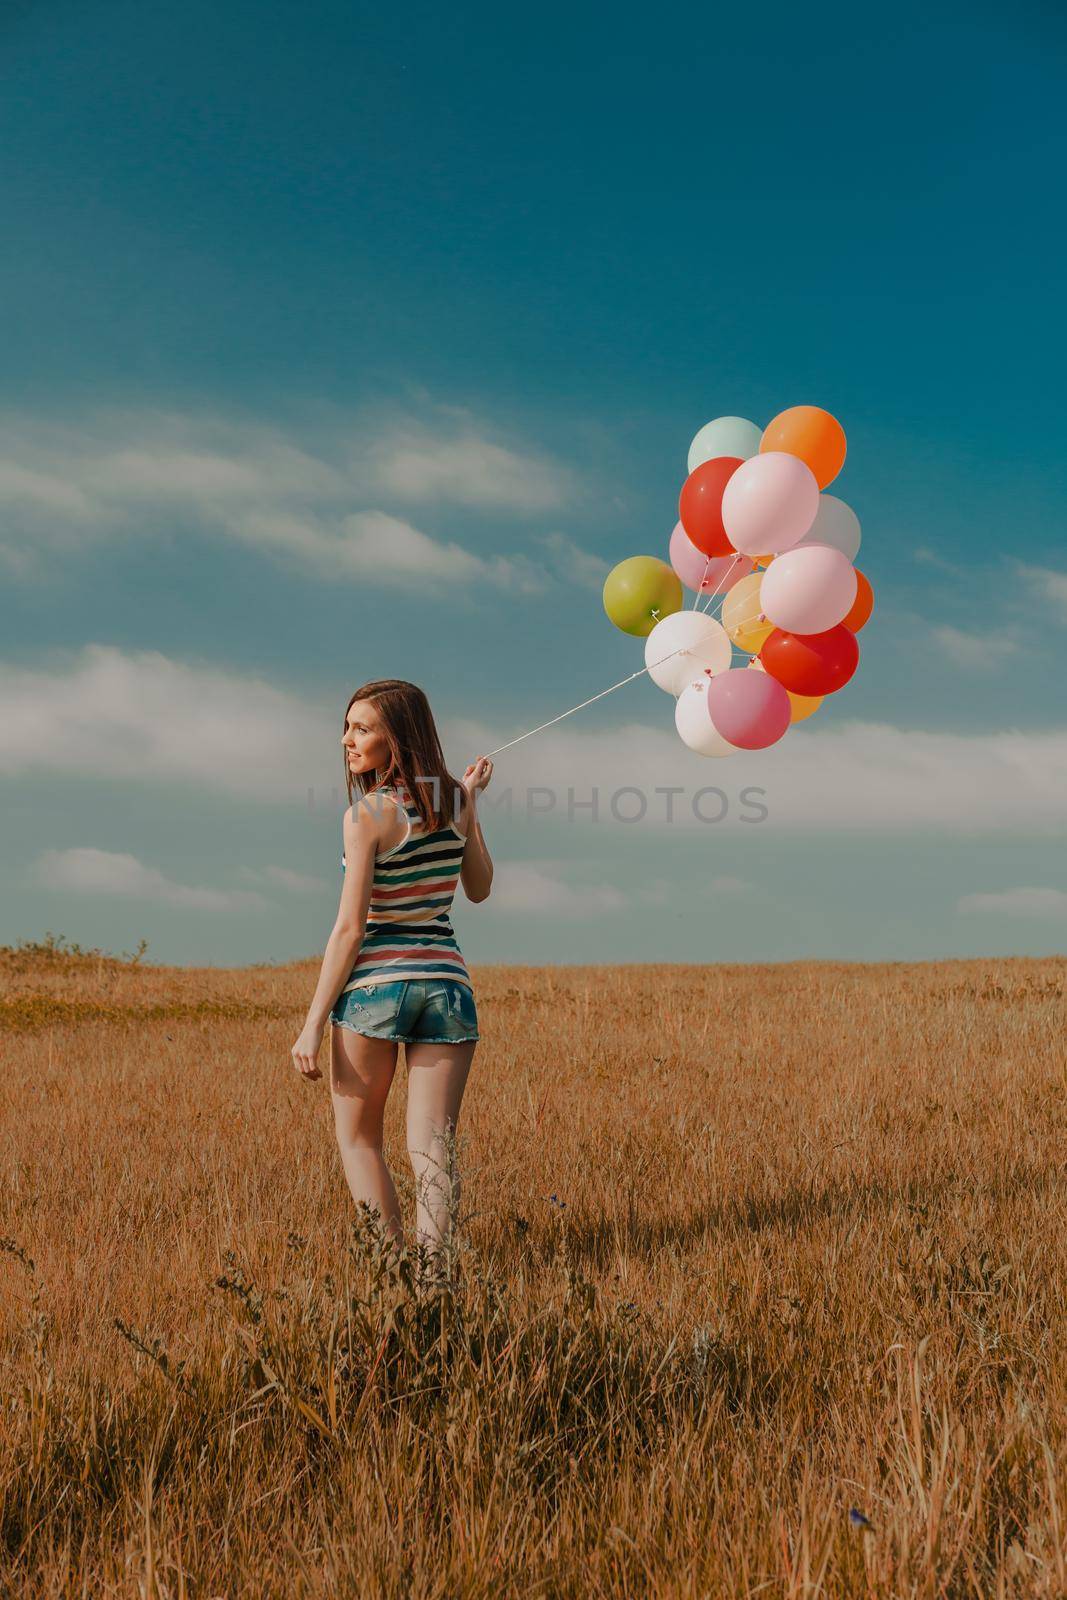 Girl with Ballons by Iko